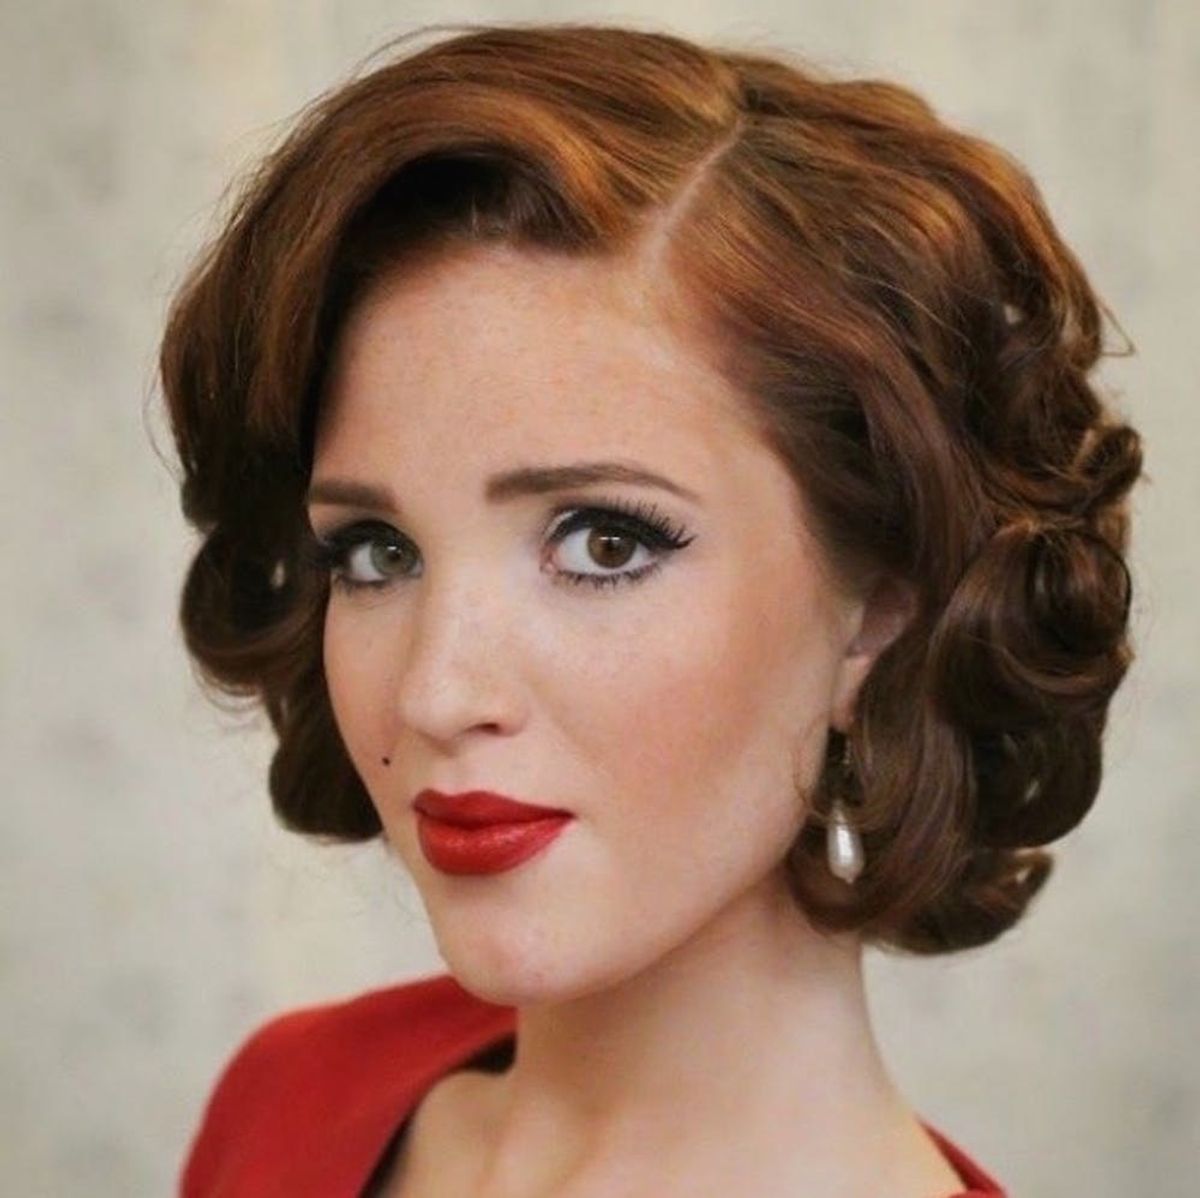 How to Style Your Hair in the Top 24 ‘Dos from the Past 100 Years